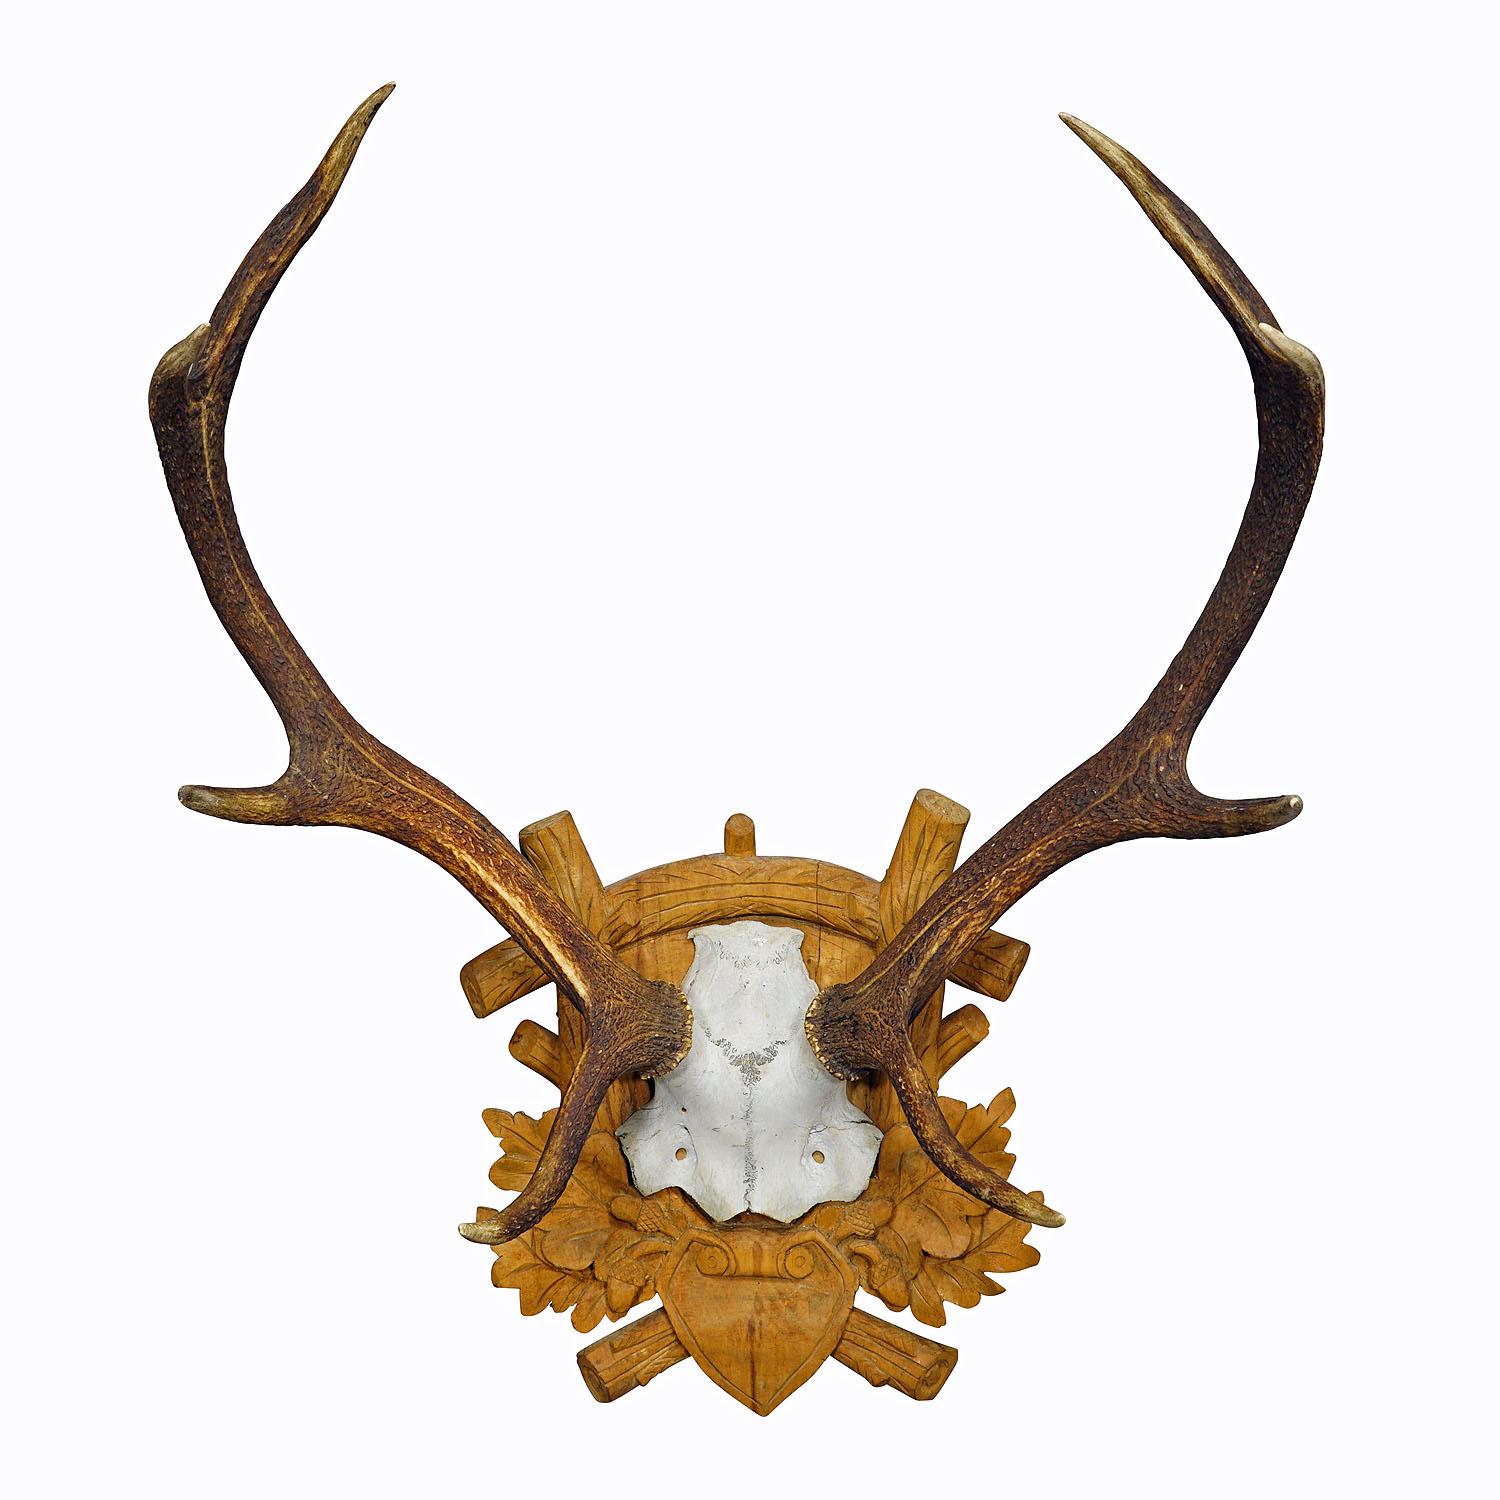 Black Forest Deer Trophy on Carved Wooden Plaque ca. 1930s

A large 8 pointer deer (Cervus elaphus) trophy from the Black Forest. The trophy was shot in the 1930s. The antlers are mounted on a carved wooden wall plaque.

Trophies are mementos from